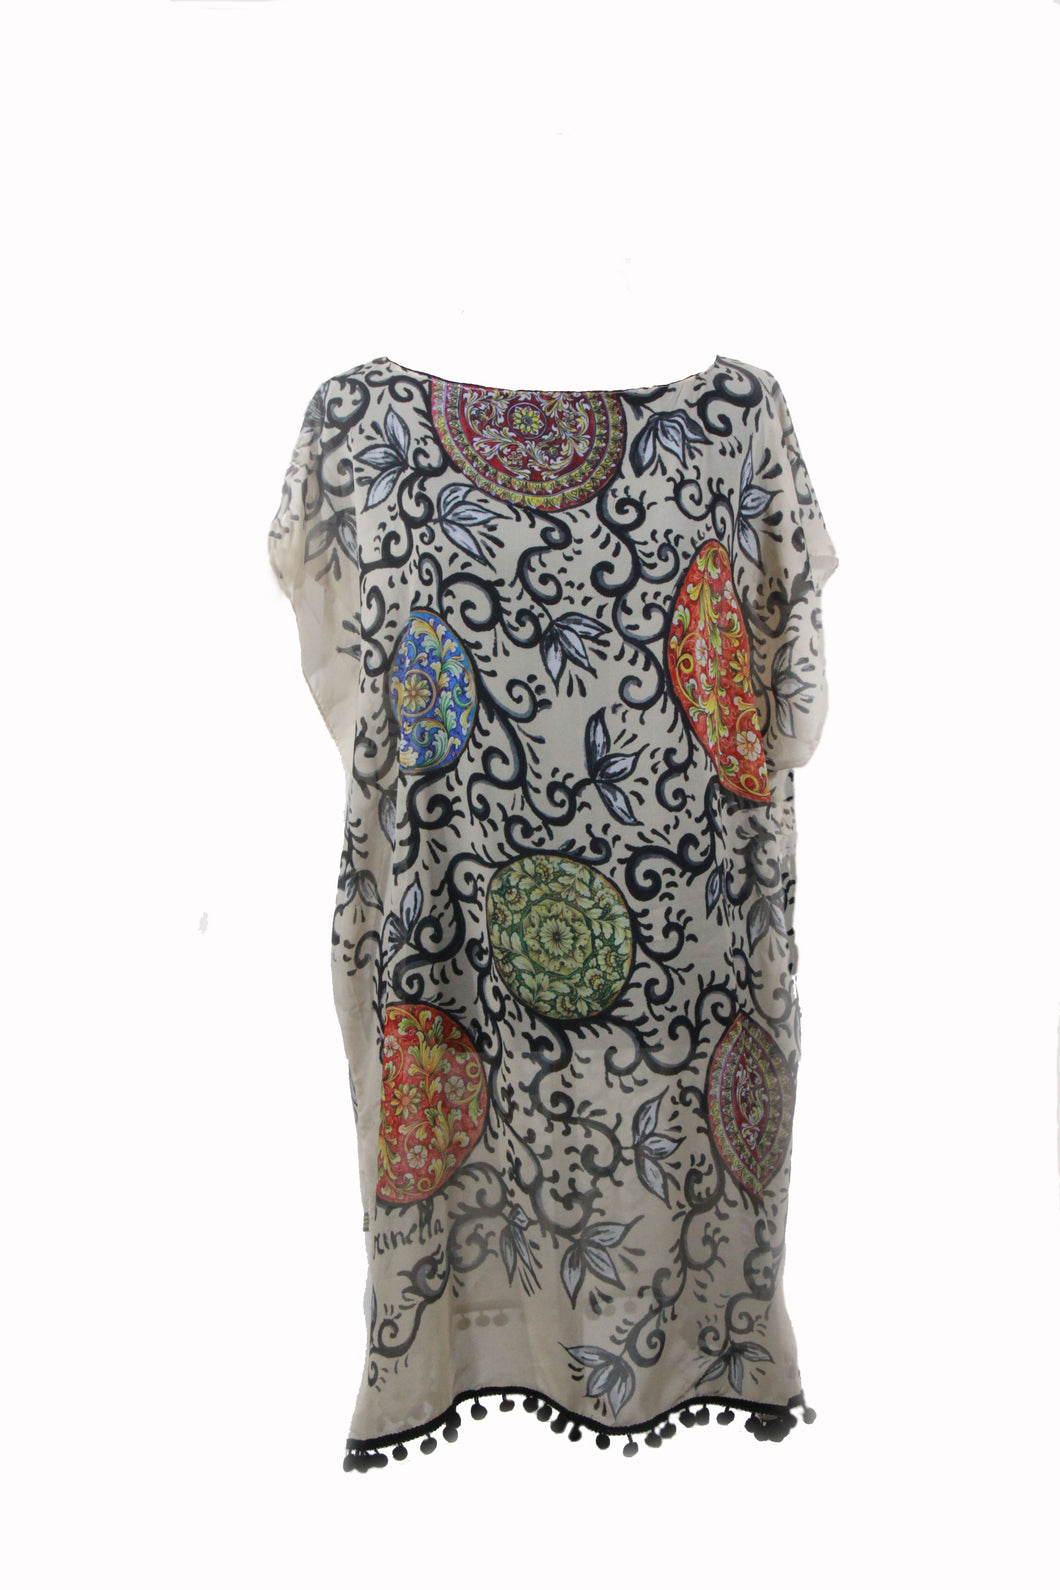 KAFTAN FOR WOMEN WITH CALTAGIRONE'S TILES (BEIGE) IN CHIFFON SILK WITH ARTISTIC PRINTS THAT COME FROM PAINTINGS.